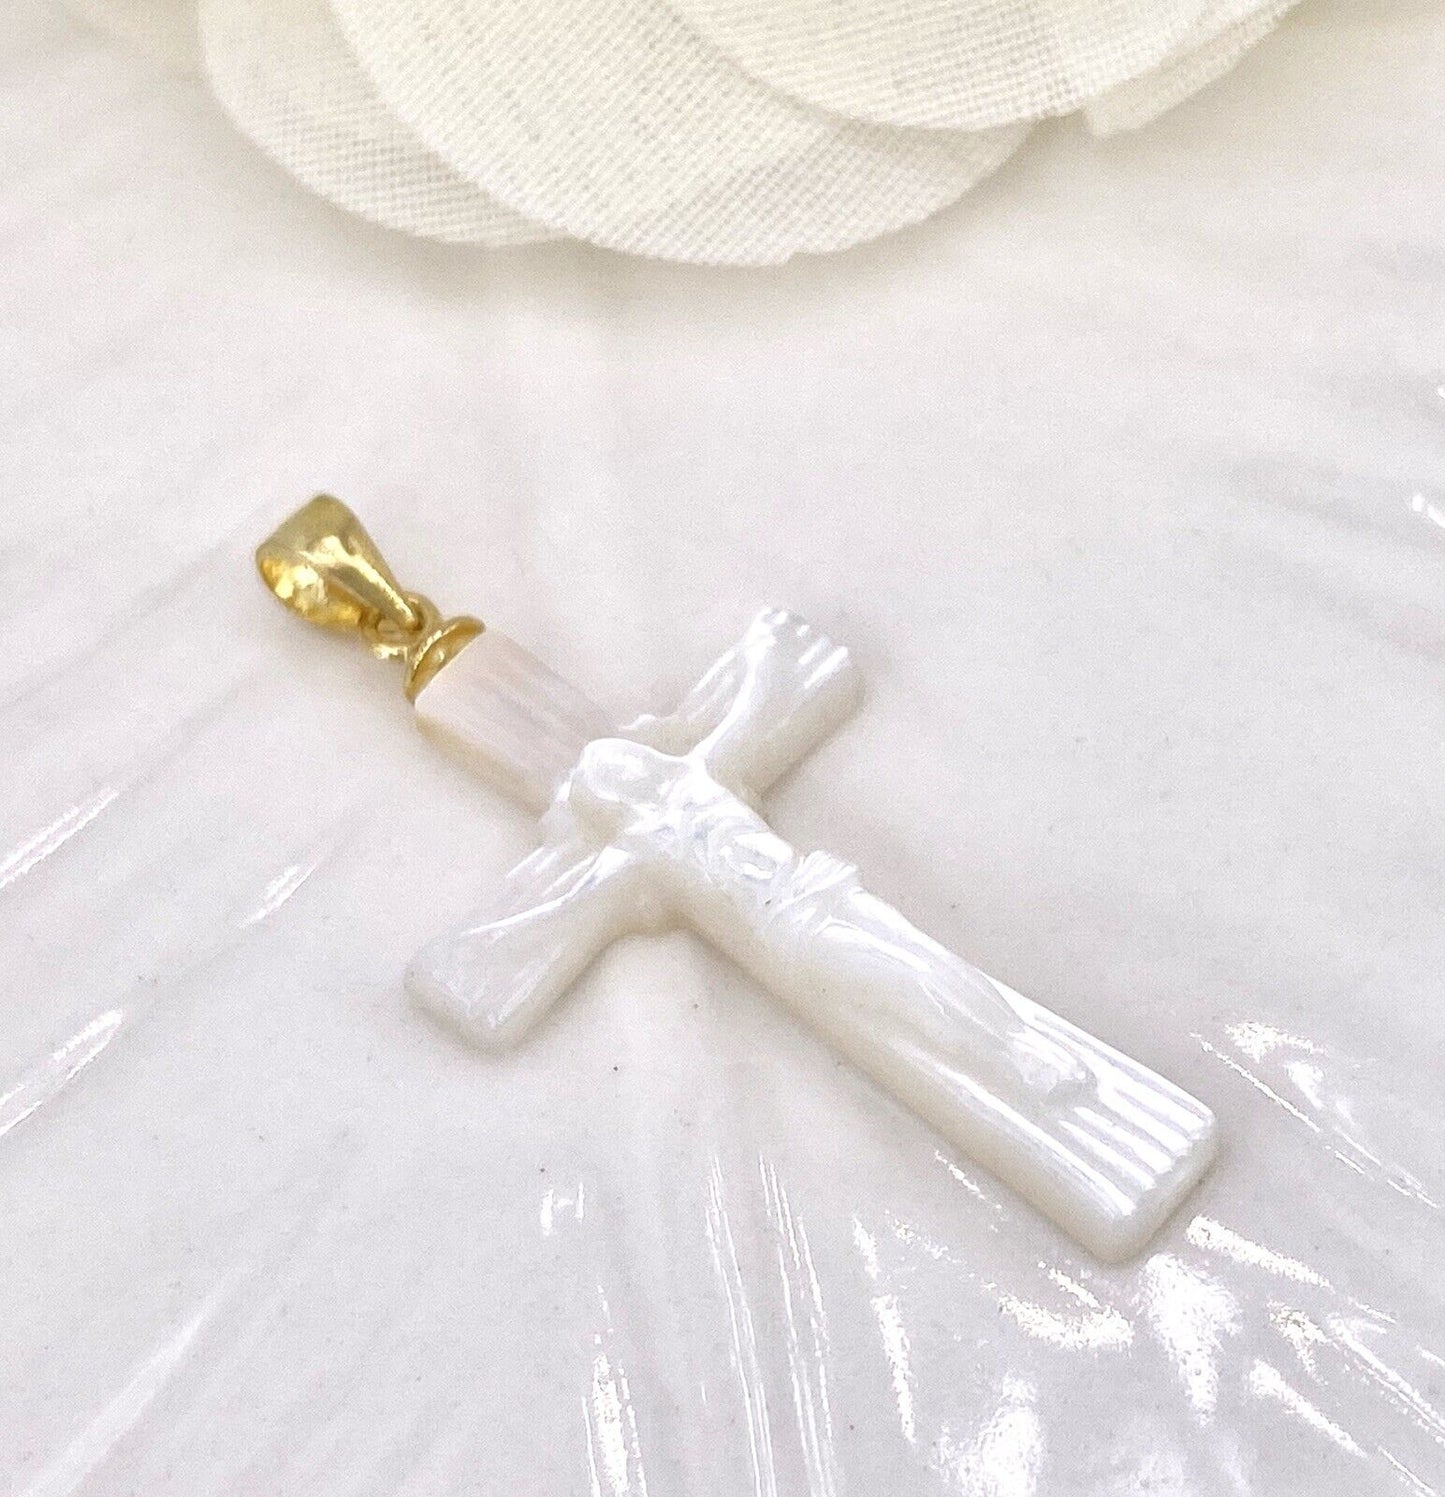 14k Gold Over 925 Sterling Silver & Mother of Pearl Crucifix Pendant, New, 1.3"